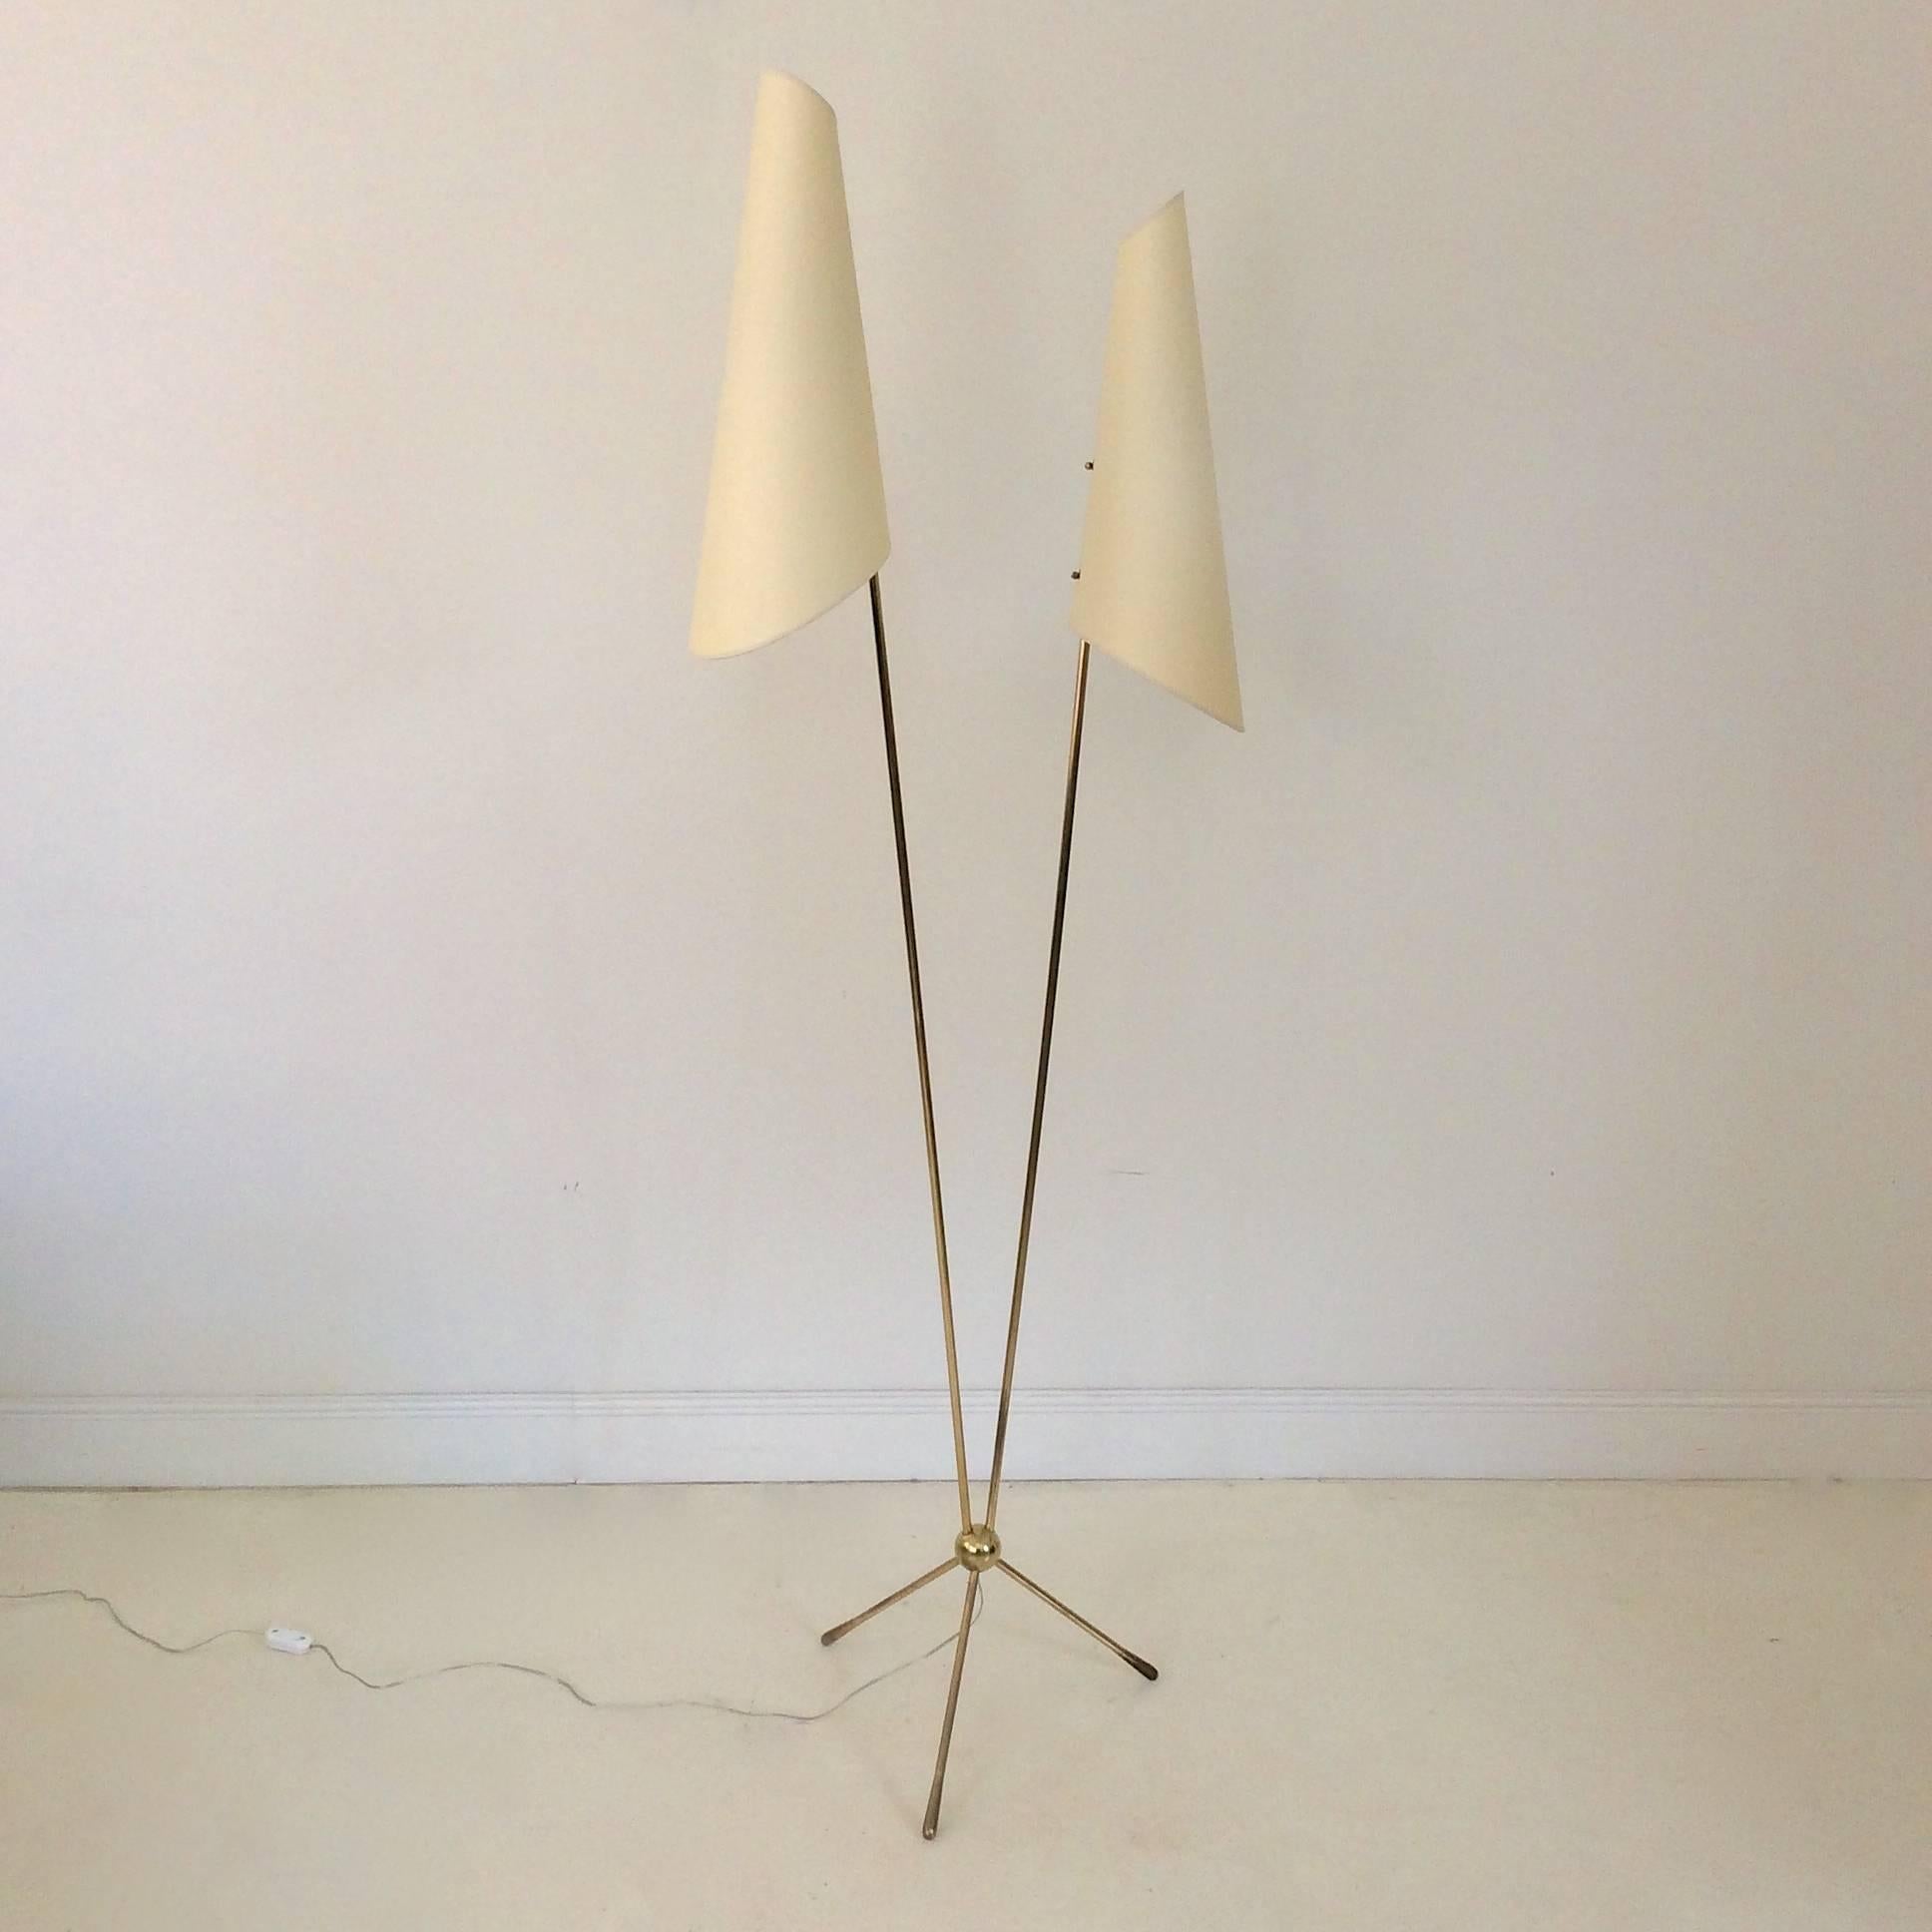 Elegant brass floor lamp with two ivory fabric shades,
circa 1950, Italy.
Rewired, two bulbs of 40 w.
Dimensions: H 165 cm, W 55 cm, D 36 cm.
Good condition.